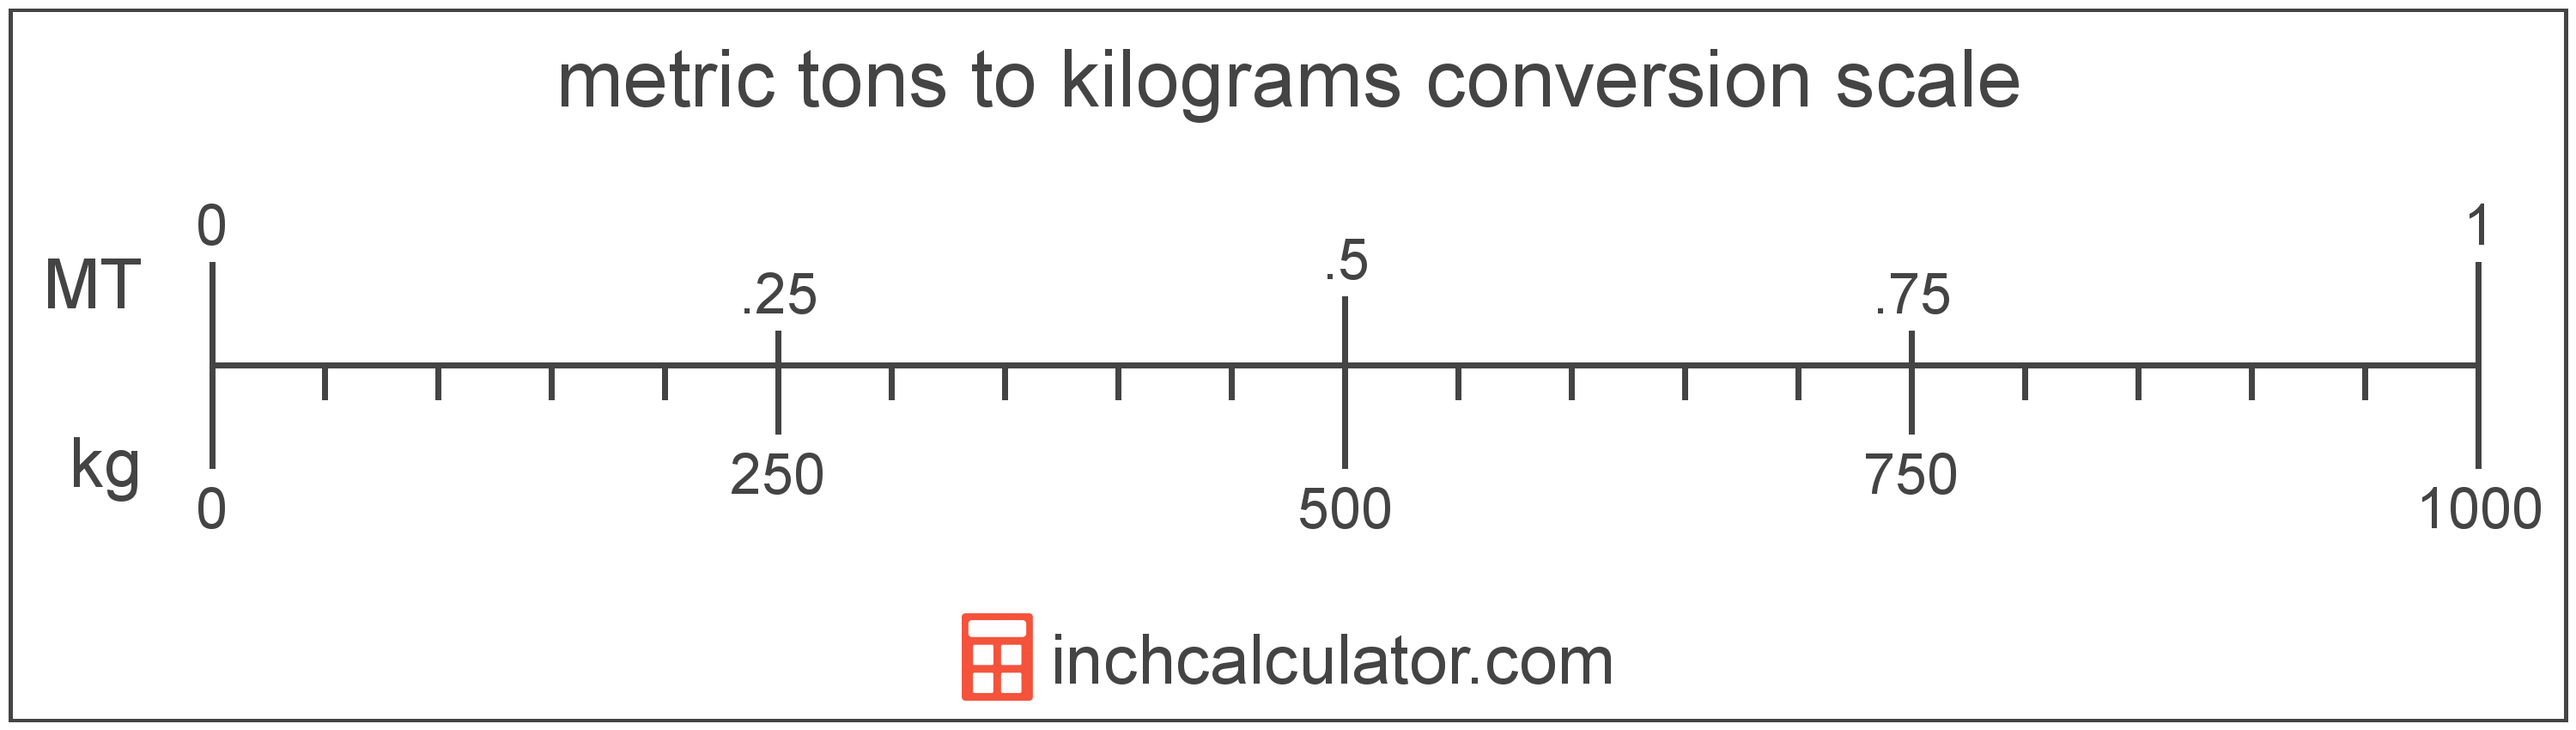 conversion scale showing metric tons and equivalent kilograms weight values